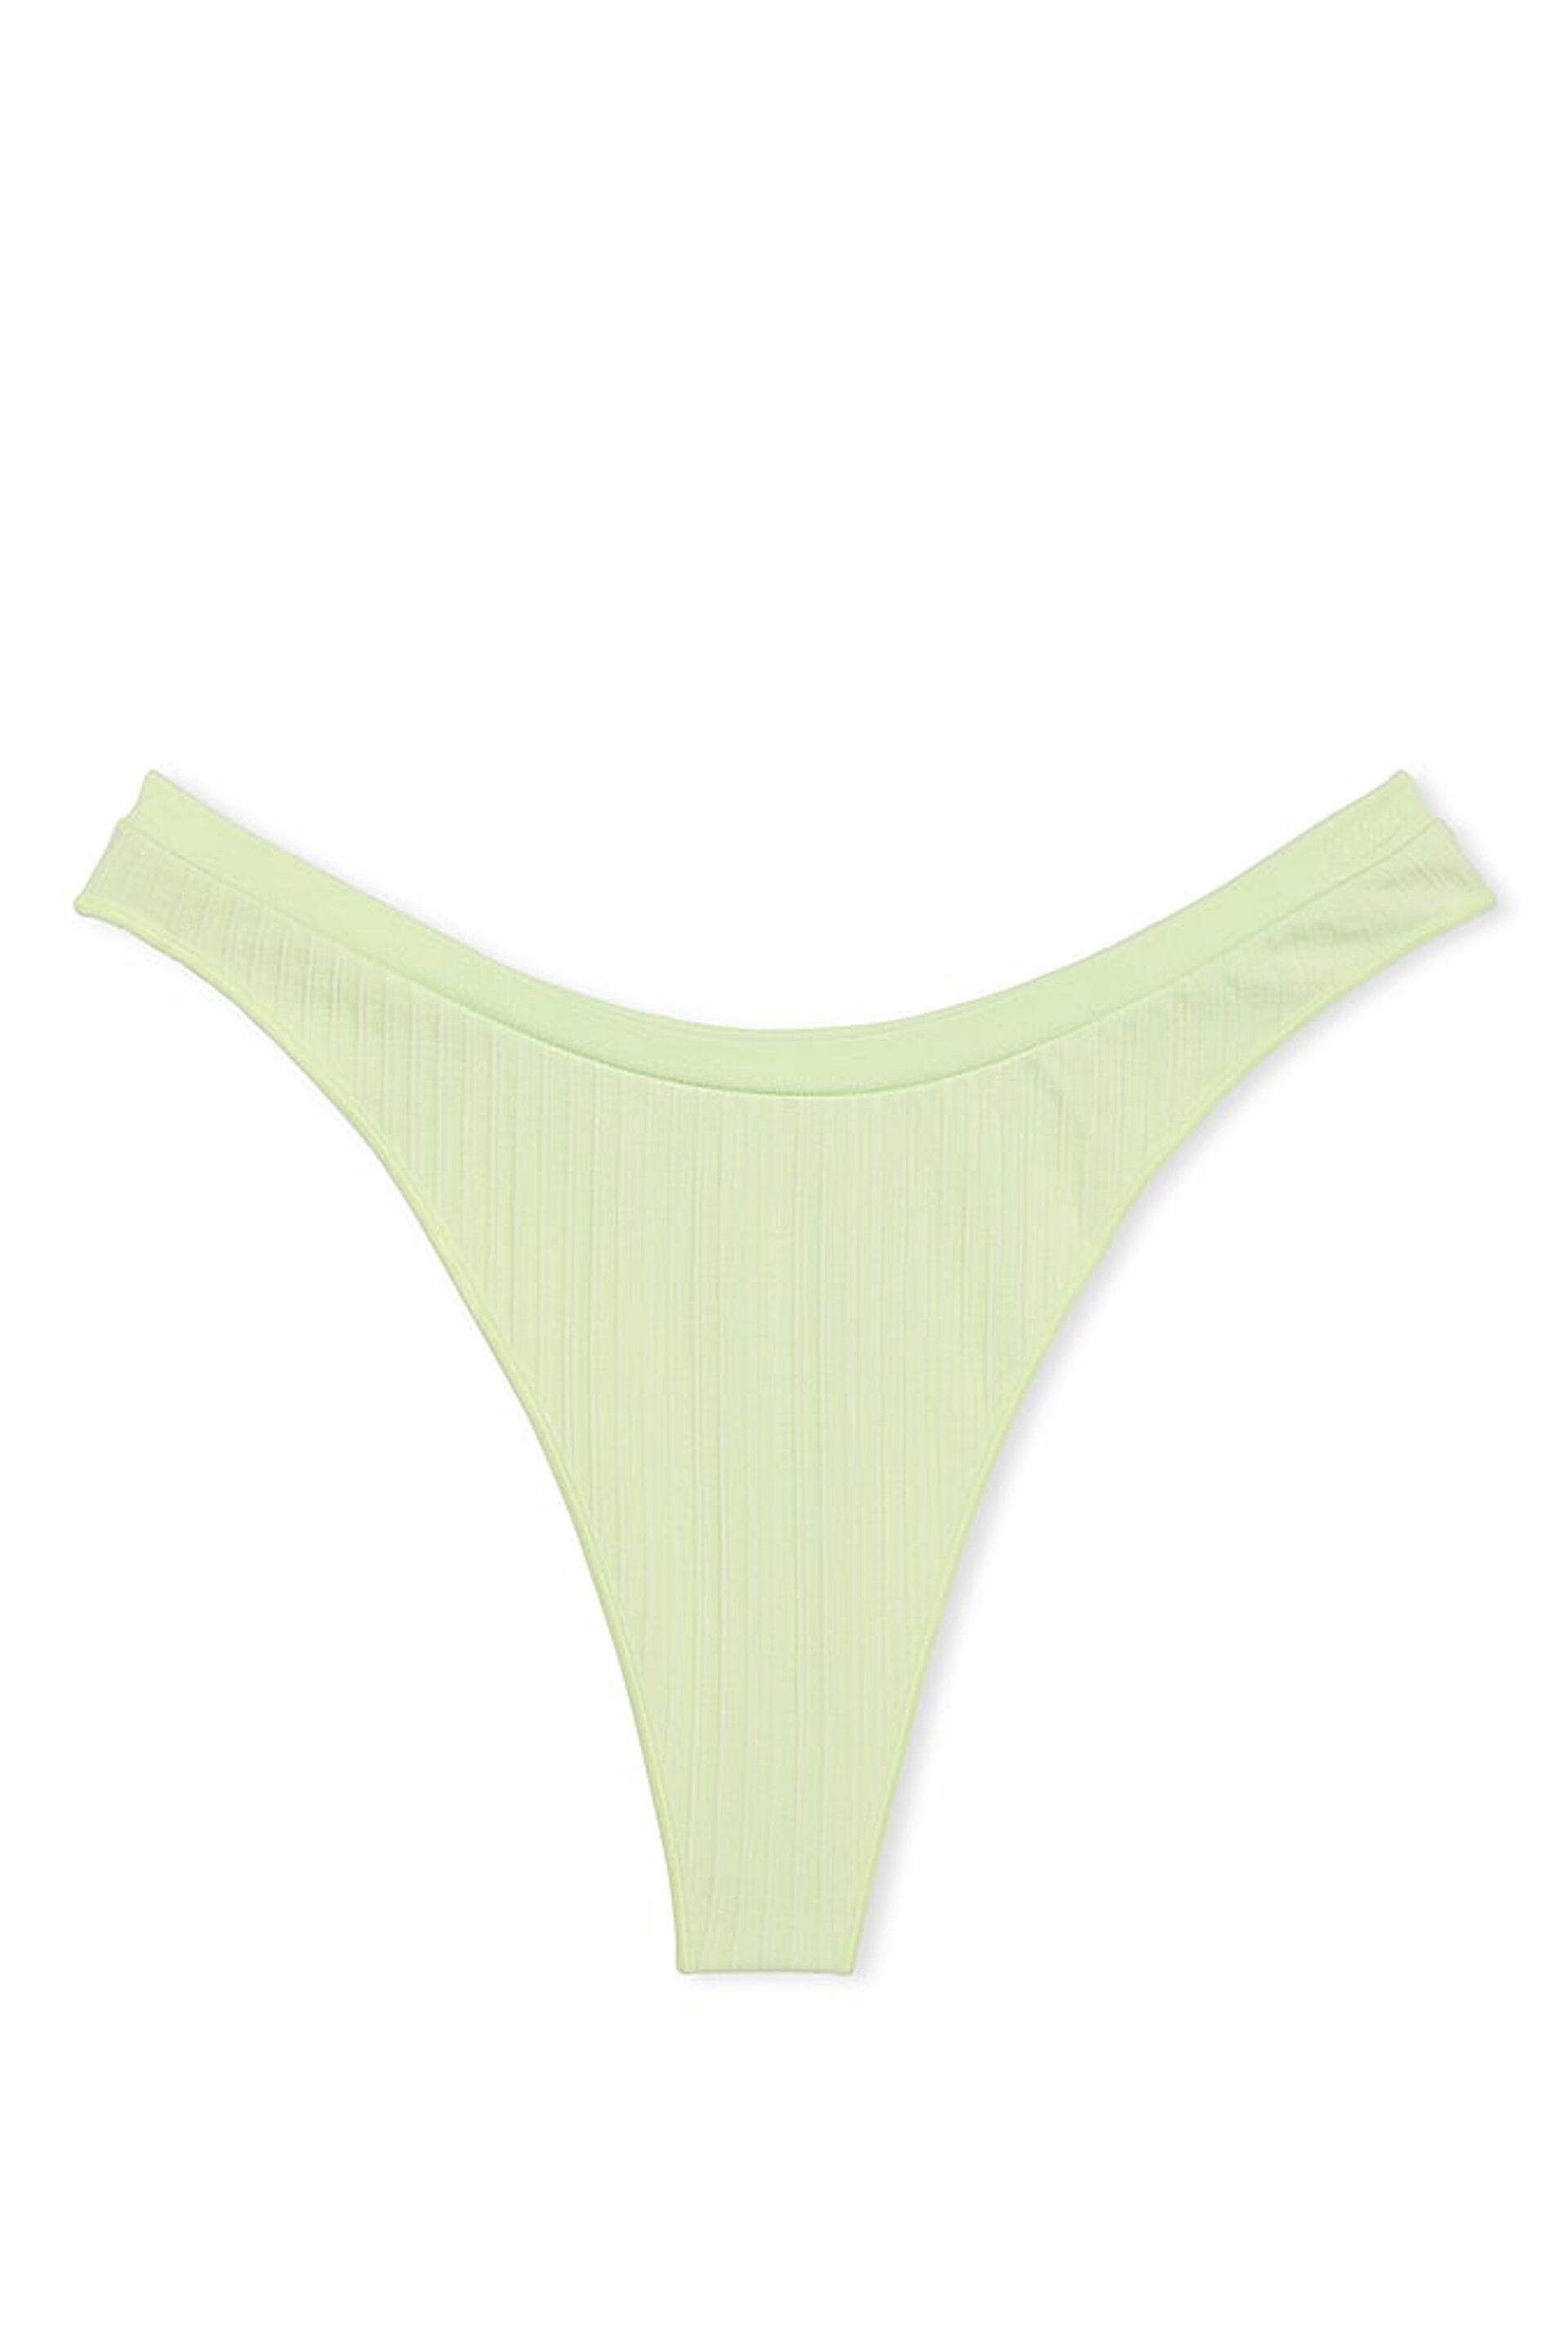 Victoria's Secret PINK Lime Cream Green Denim Thong Knickers - Image 3 of 3